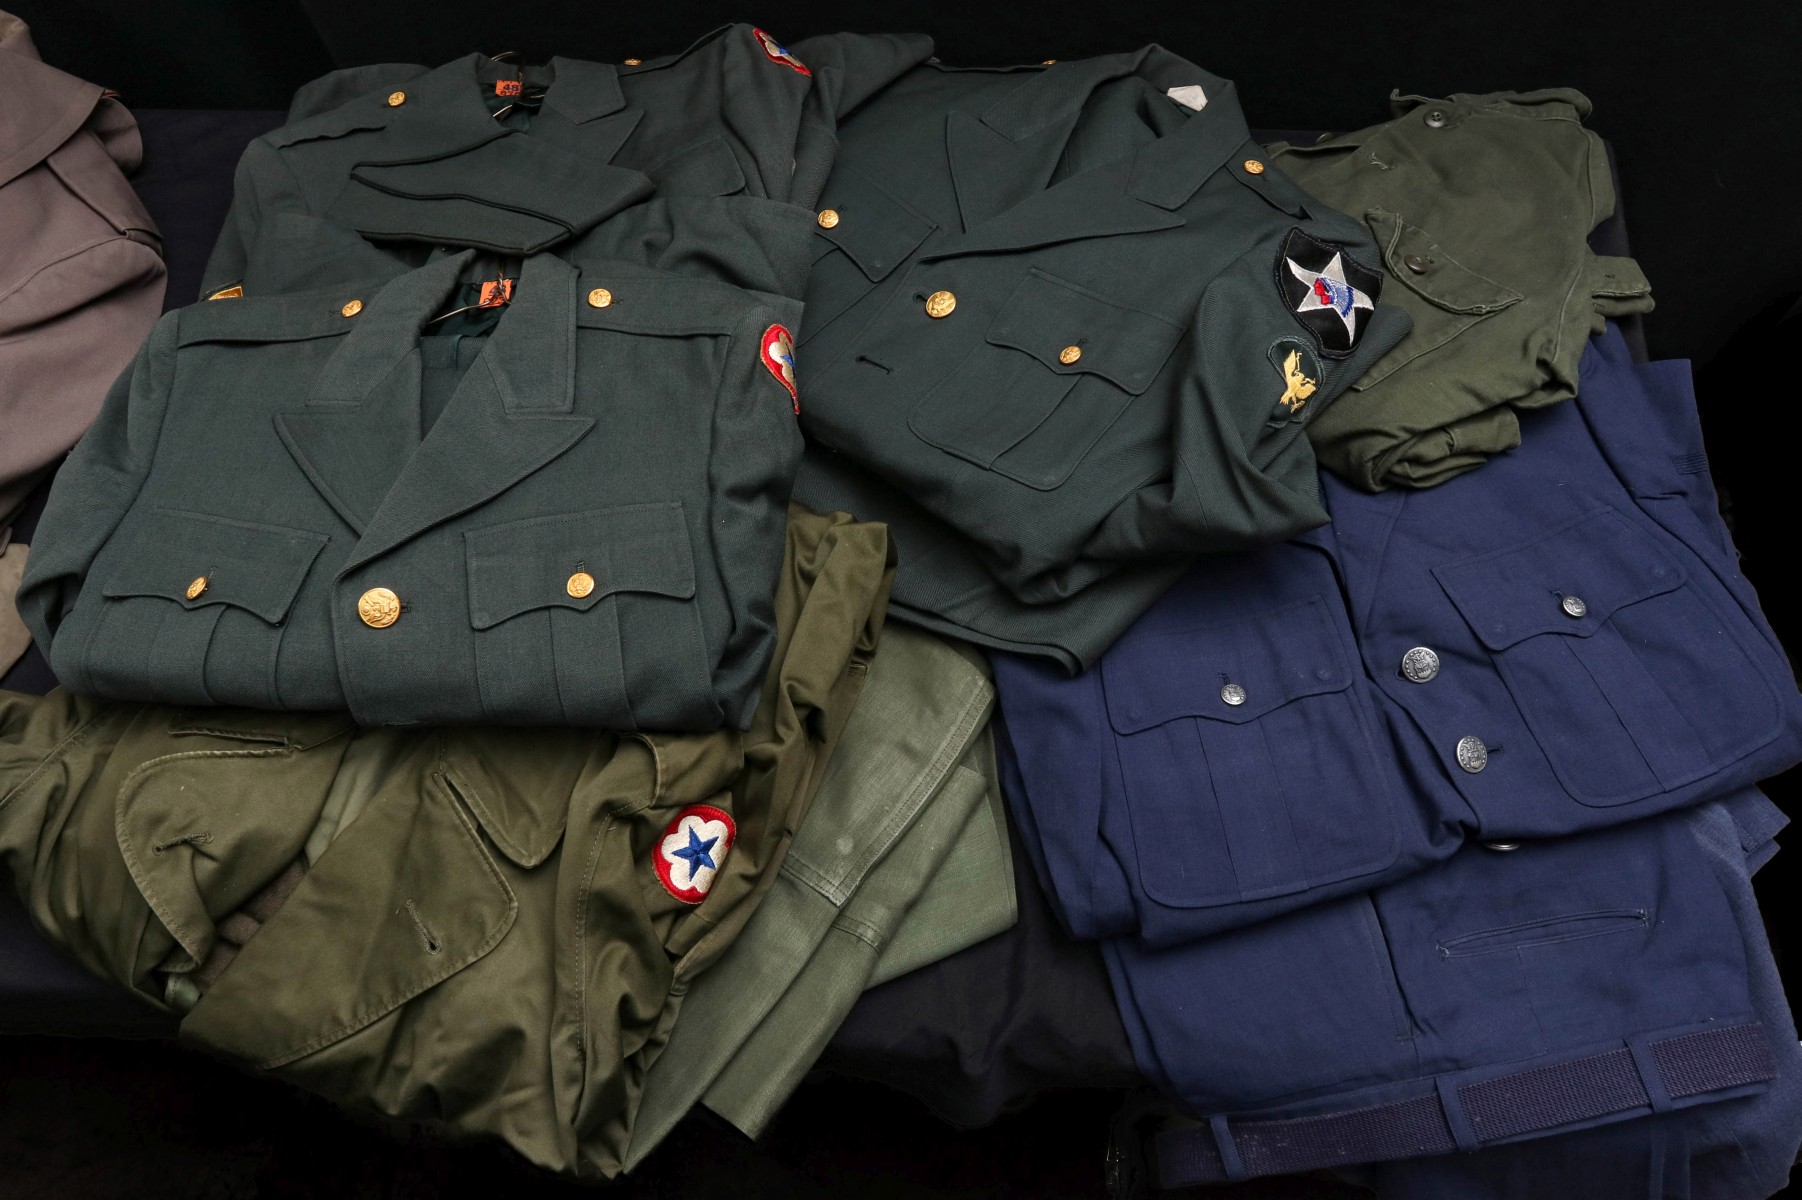 POST WAR ARMY AND AIR FORCE UNIFORMS, OFFICER UNIFORMS